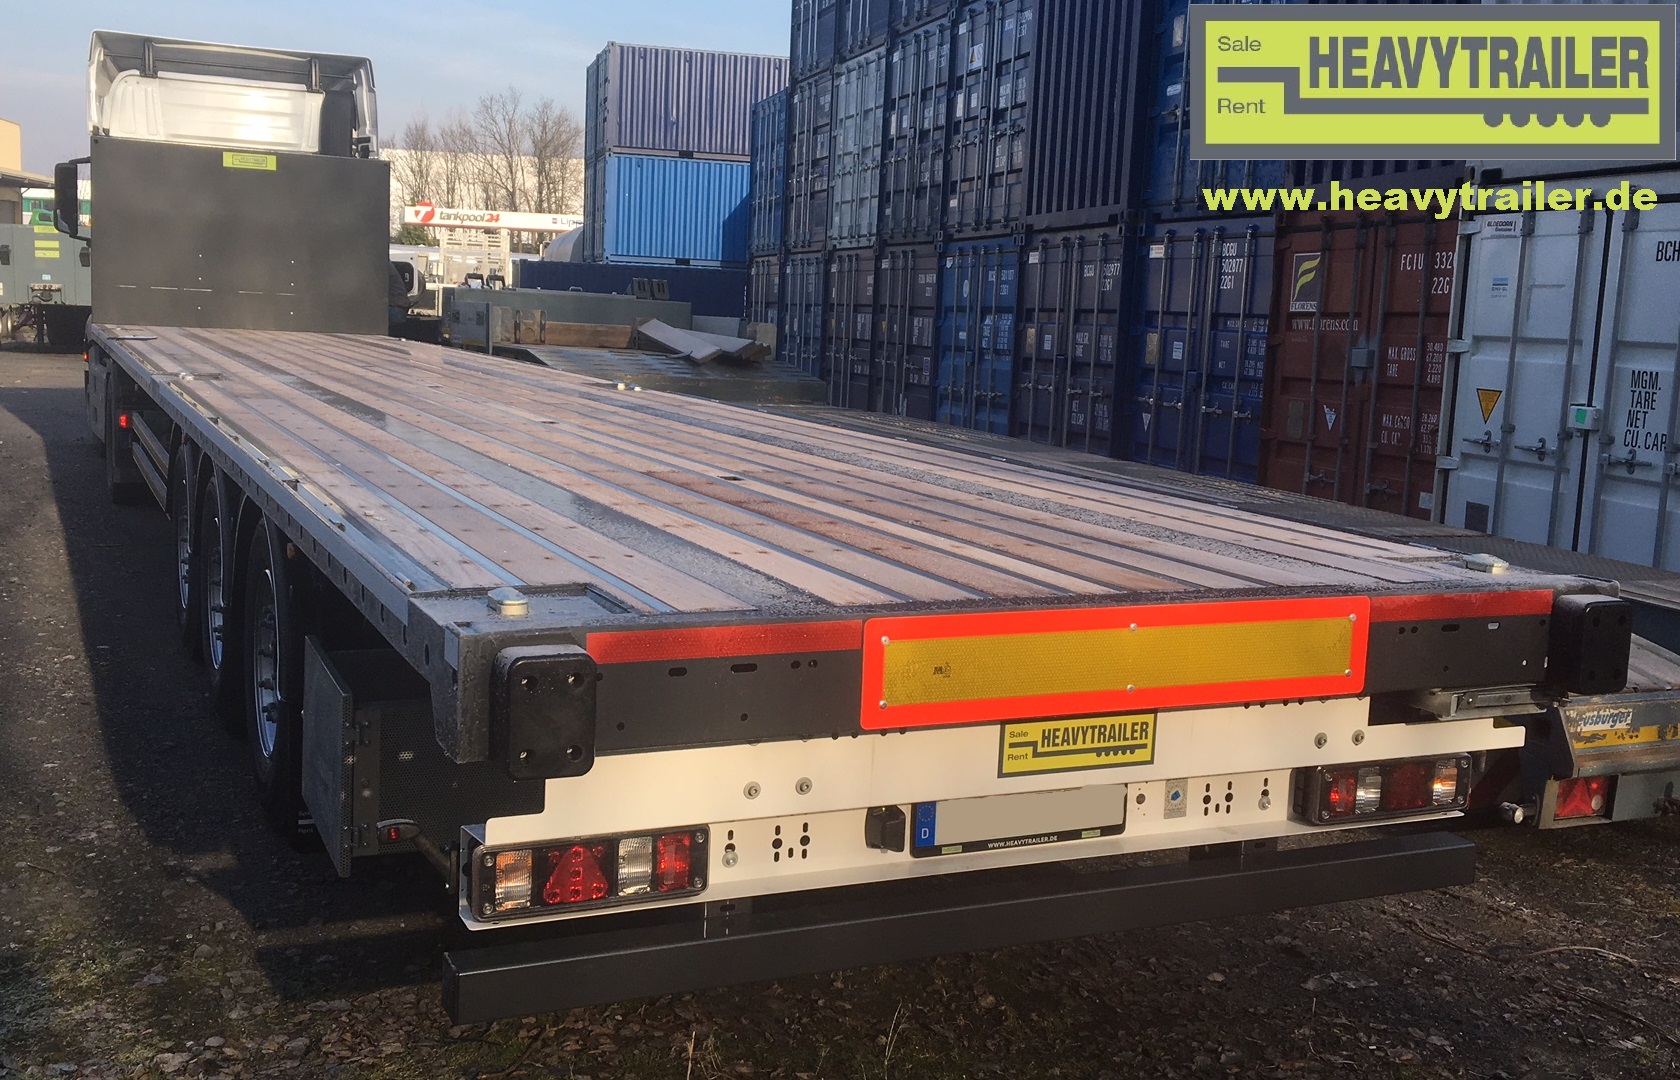 Heavytrailer 3-axle-platform-trailer with container lockings